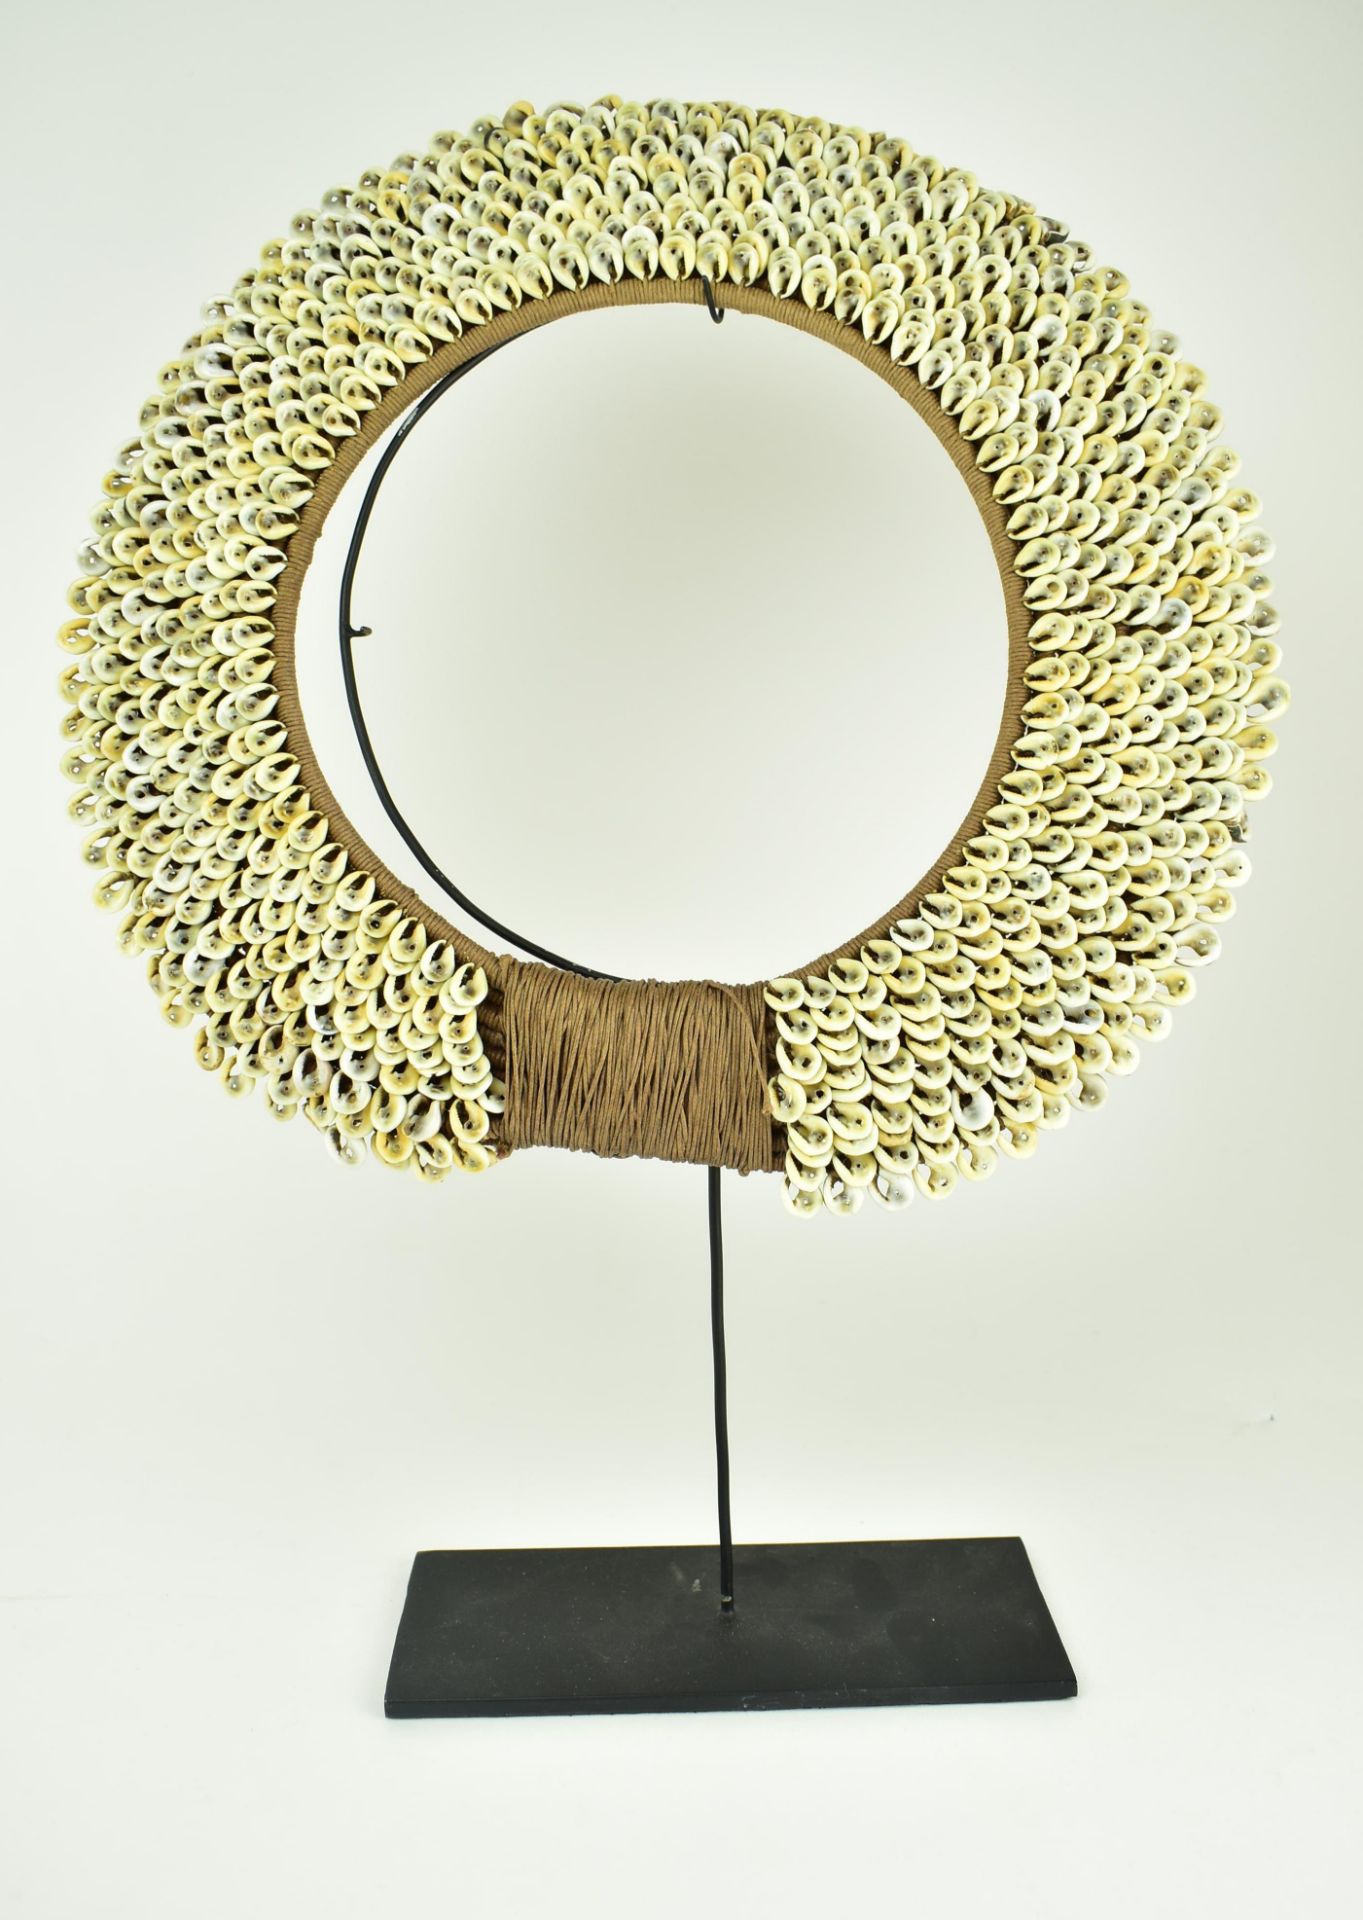 TWO ROCHE BOBOIS NATURAL SHELL NECKLACE ON STAND - Image 5 of 6